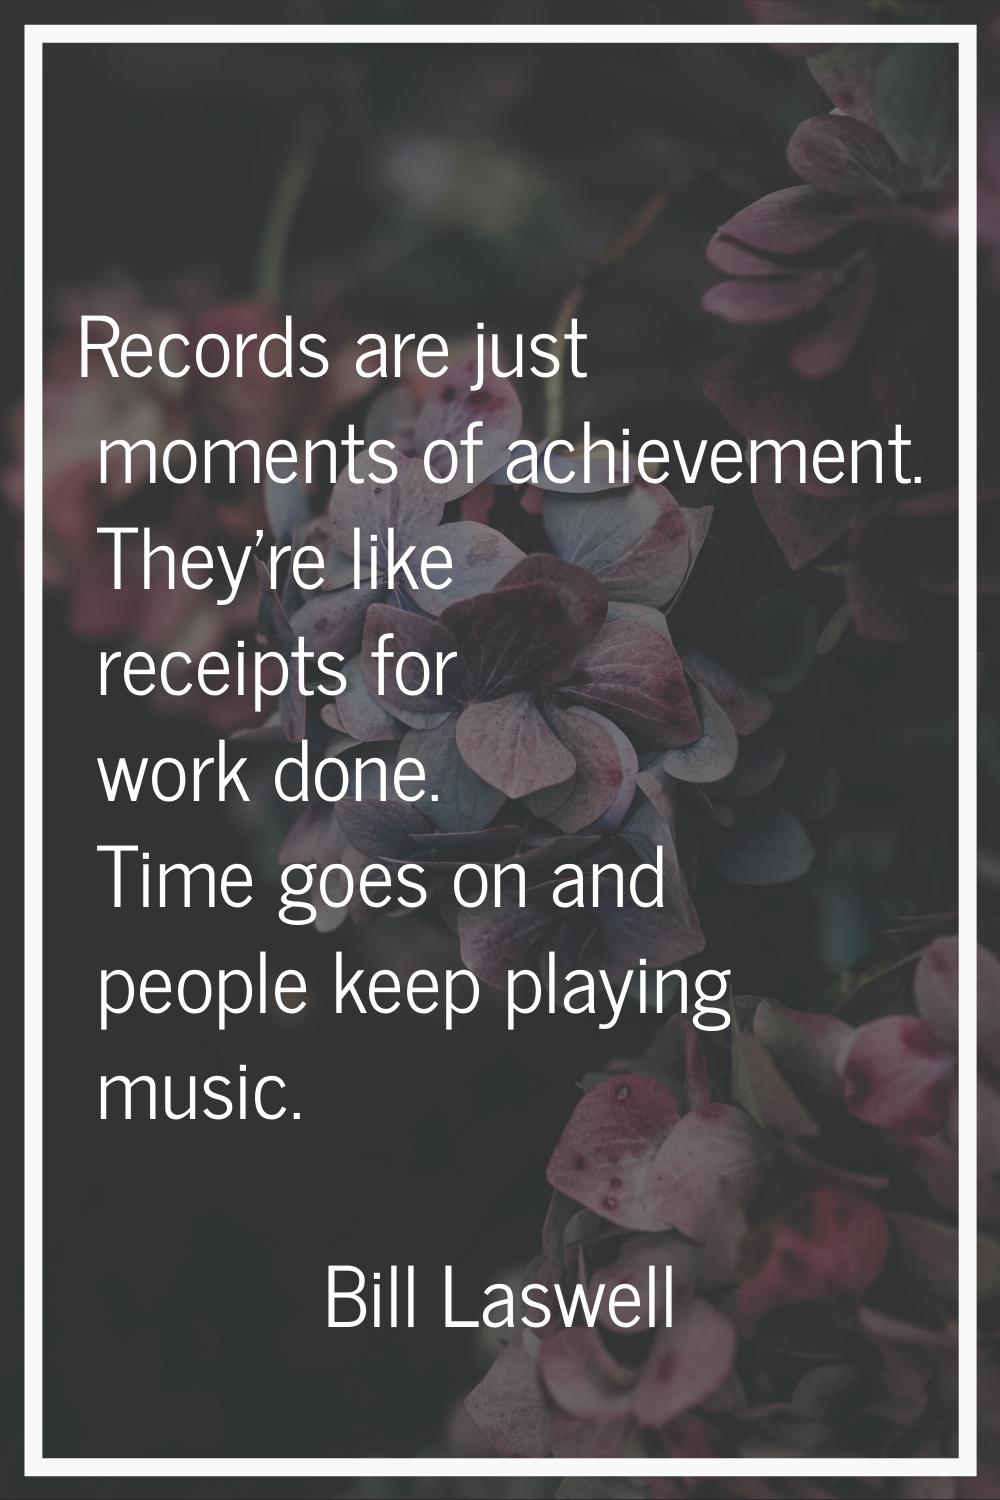 Records are just moments of achievement. They're like receipts for work done. Time goes on and peop